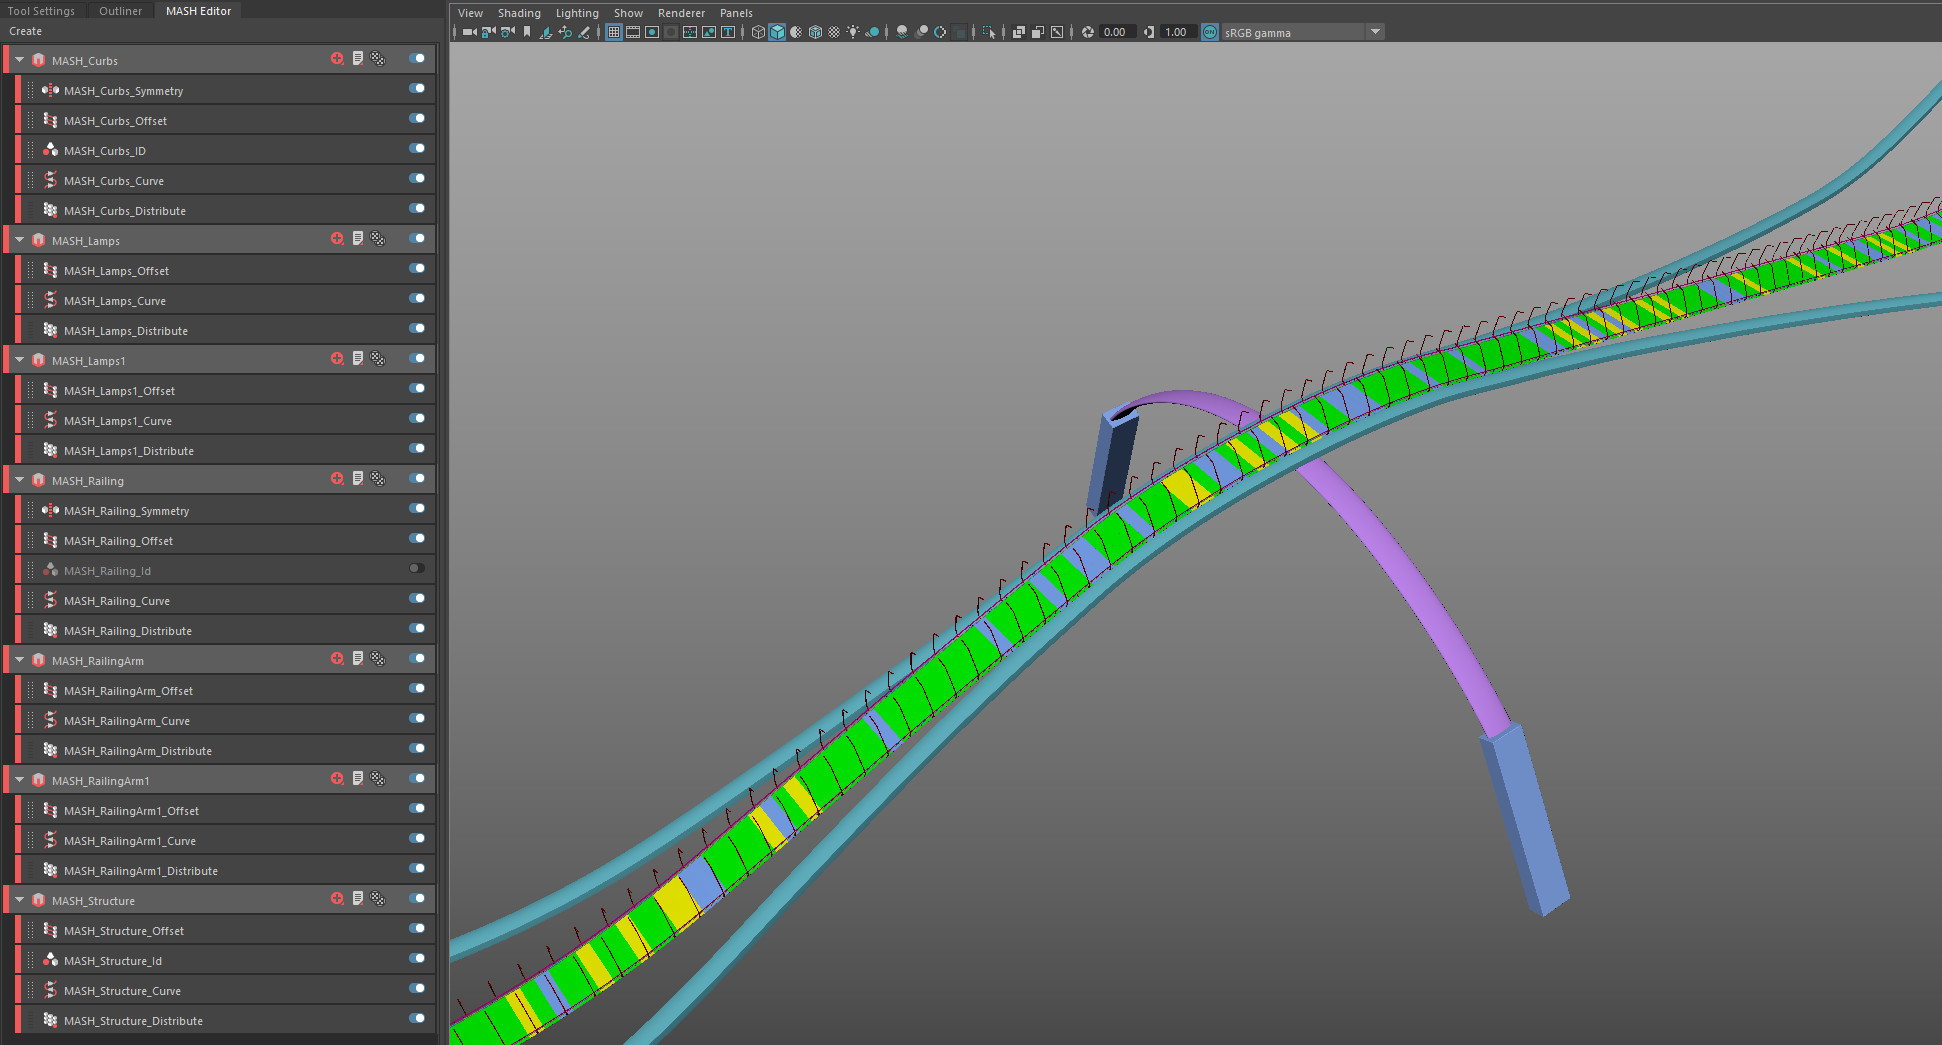 I used MASH to populate the bridge meshes along a curve.